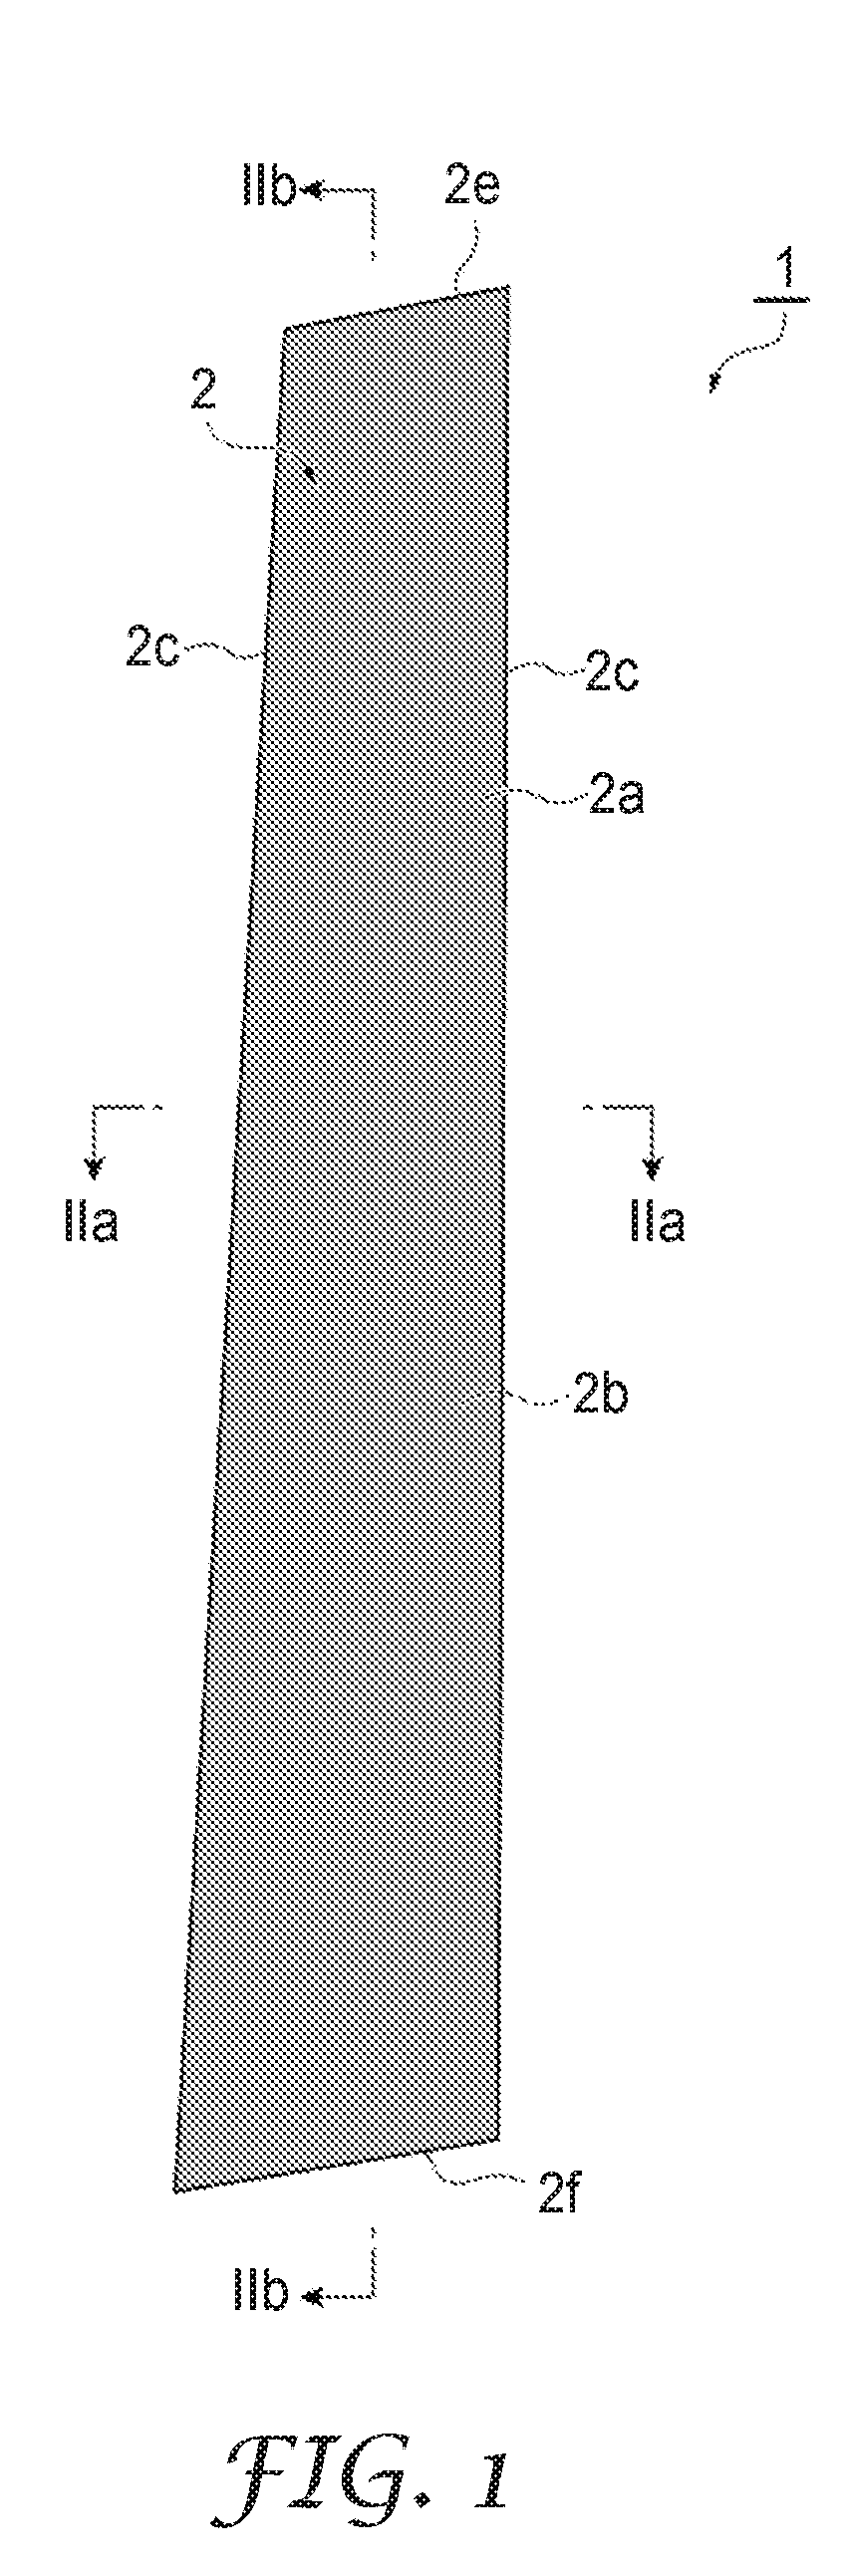 Adhesive backed decorative article, method of making, and method of use